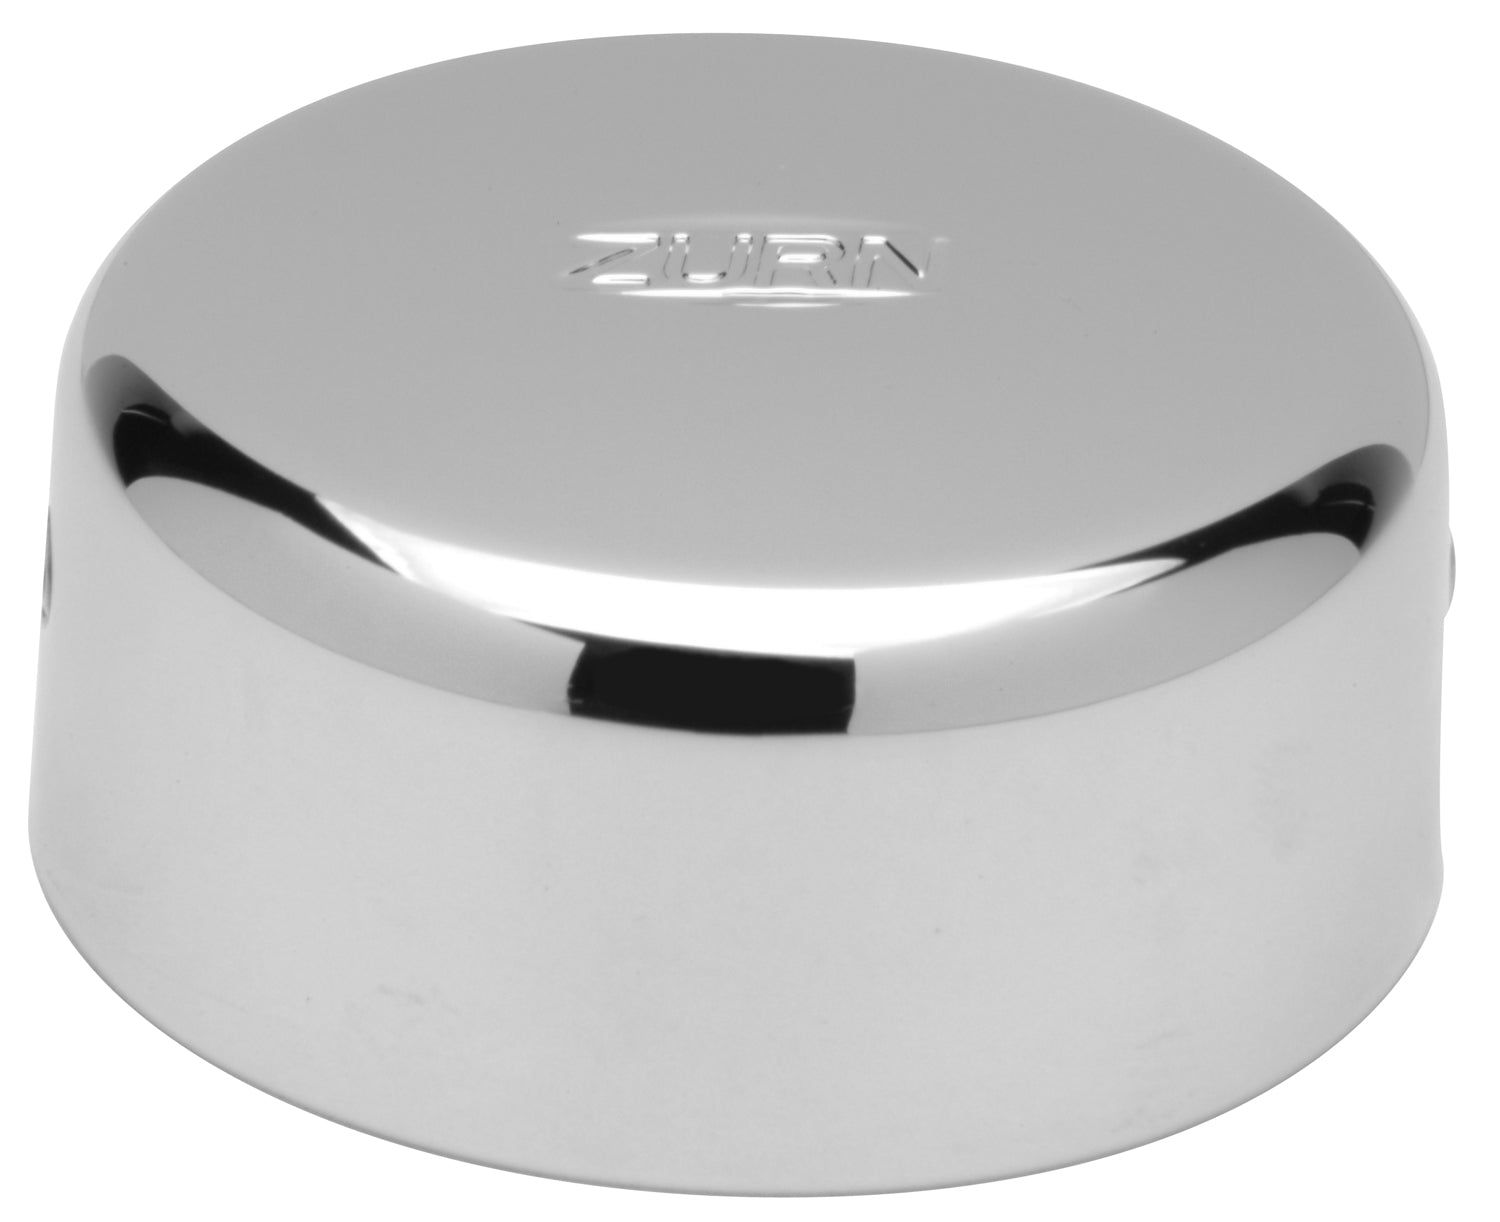 Zurn P6000-VC Vandal-Resistant Control Stop Cover for Flush Valves, Fits ¾ and 1” Sizes, Chrome-Plated